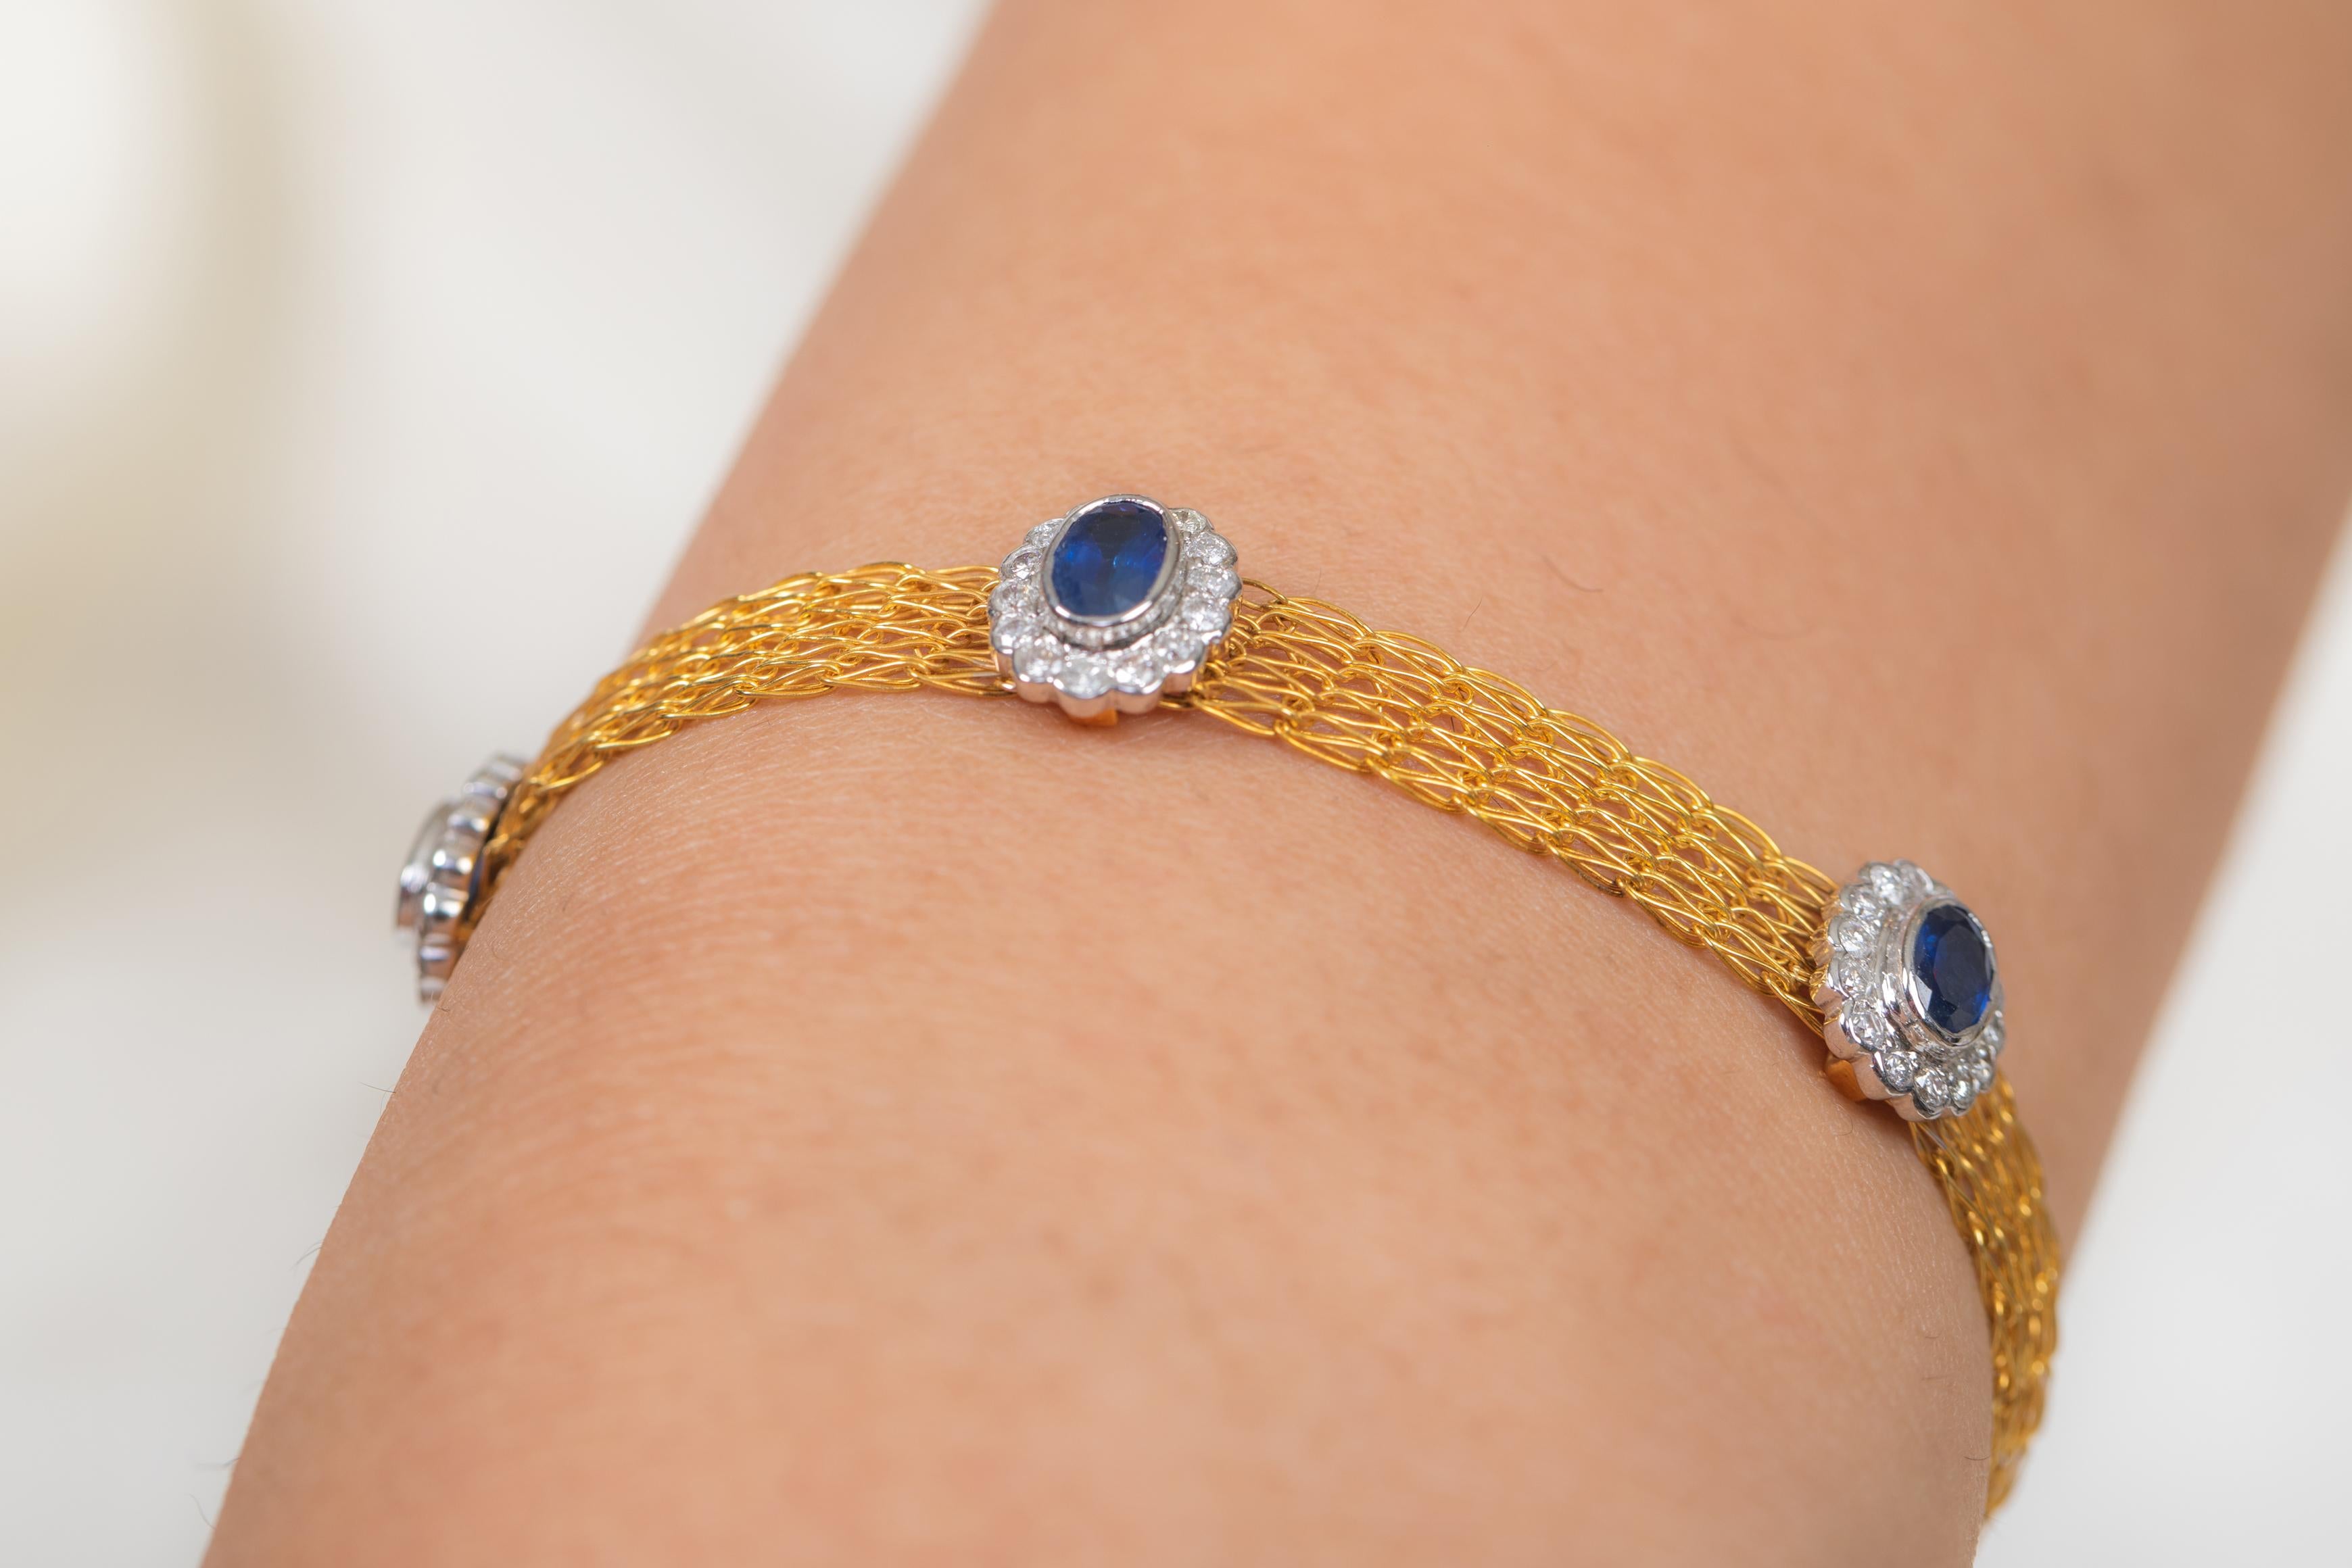 The wearing of charms may have begun as a form of amulet or talisman to ward off evil spirits or bad luck.
This blue sapphire bracelet has a oval cut gemstone and diamonds in 18K Gold. A perfect piece of jewelry to adorn your jewelry